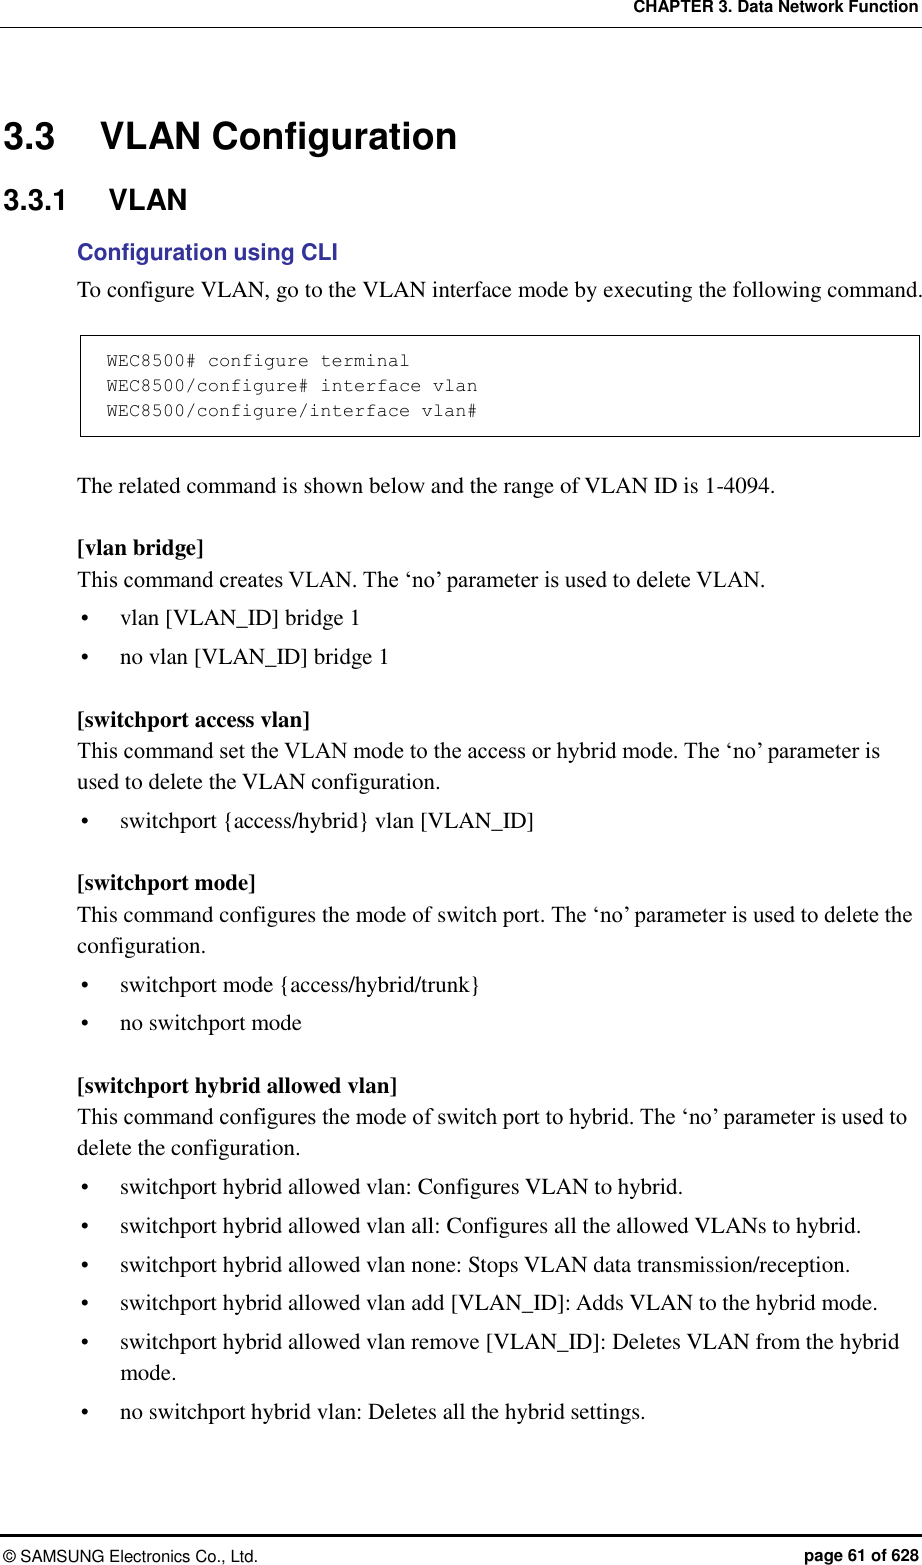 CHAPTER 3. Data Network Function ©  SAMSUNG Electronics Co., Ltd.  page 61 of 628 3.3  VLAN Configuration 3.3.1  VLAN Configuration using CLI To configure VLAN, go to the VLAN interface mode by executing the following command.  WEC8500# configure terminal WEC8500/configure# interface vlan WEC8500/configure/interface vlan#  The related command is shown below and the range of VLAN ID is 1-4094.  [vlan bridge] This command creates VLAN. The ‘no’ parameter is used to delete VLAN.    vlan [VLAN_ID] bridge 1  no vlan [VLAN_ID] bridge 1  [switchport access vlan] This command set the VLAN mode to the access or hybrid mode. The ‘no’ parameter is used to delete the VLAN configuration.  switchport {access/hybrid} vlan [VLAN_ID]  [switchport mode] This command configures the mode of switch port. The ‘no’ parameter is used to delete the configuration.  switchport mode {access/hybrid/trunk}  no switchport mode  [switchport hybrid allowed vlan] This command configures the mode of switch port to hybrid. The ‘no’ parameter is used to delete the configuration.  switchport hybrid allowed vlan: Configures VLAN to hybrid.  switchport hybrid allowed vlan all: Configures all the allowed VLANs to hybrid.  switchport hybrid allowed vlan none: Stops VLAN data transmission/reception.  switchport hybrid allowed vlan add [VLAN_ID]: Adds VLAN to the hybrid mode.  switchport hybrid allowed vlan remove [VLAN_ID]: Deletes VLAN from the hybrid mode.  no switchport hybrid vlan: Deletes all the hybrid settings.  